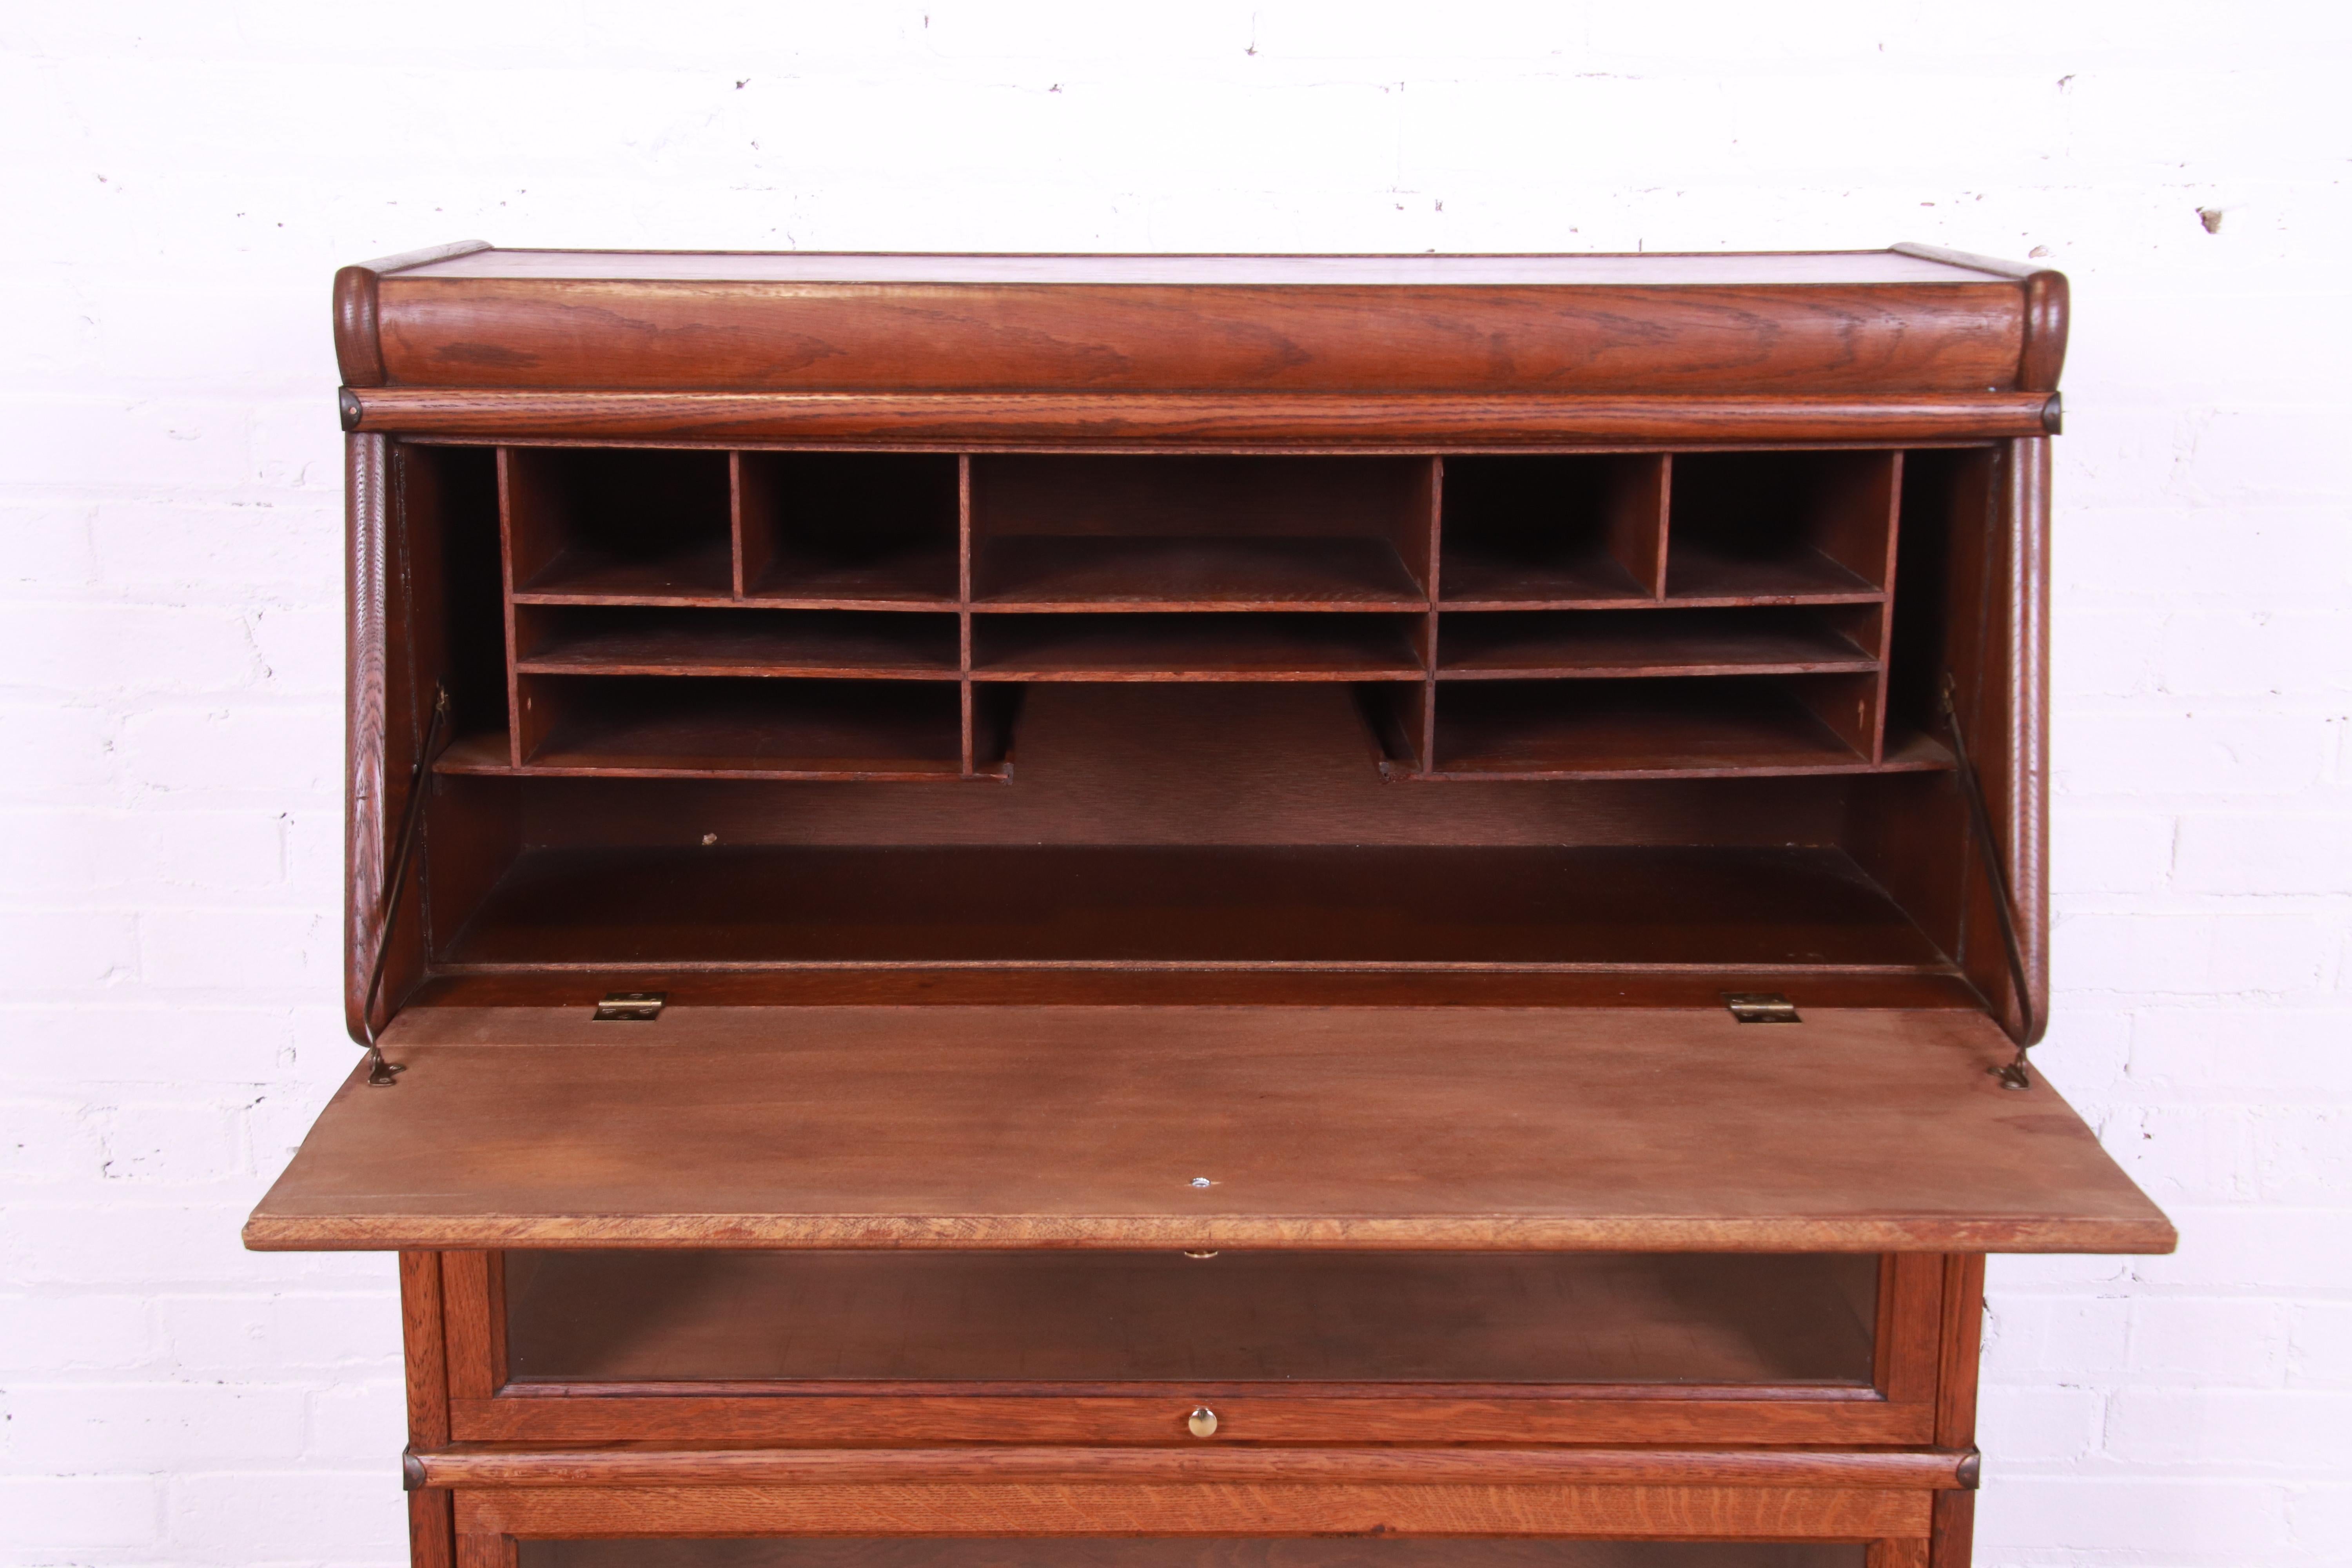 Arts & Crafts Oak Barrister Bookcase with Drop Front Secretary Desk, circa 1920s For Sale 2